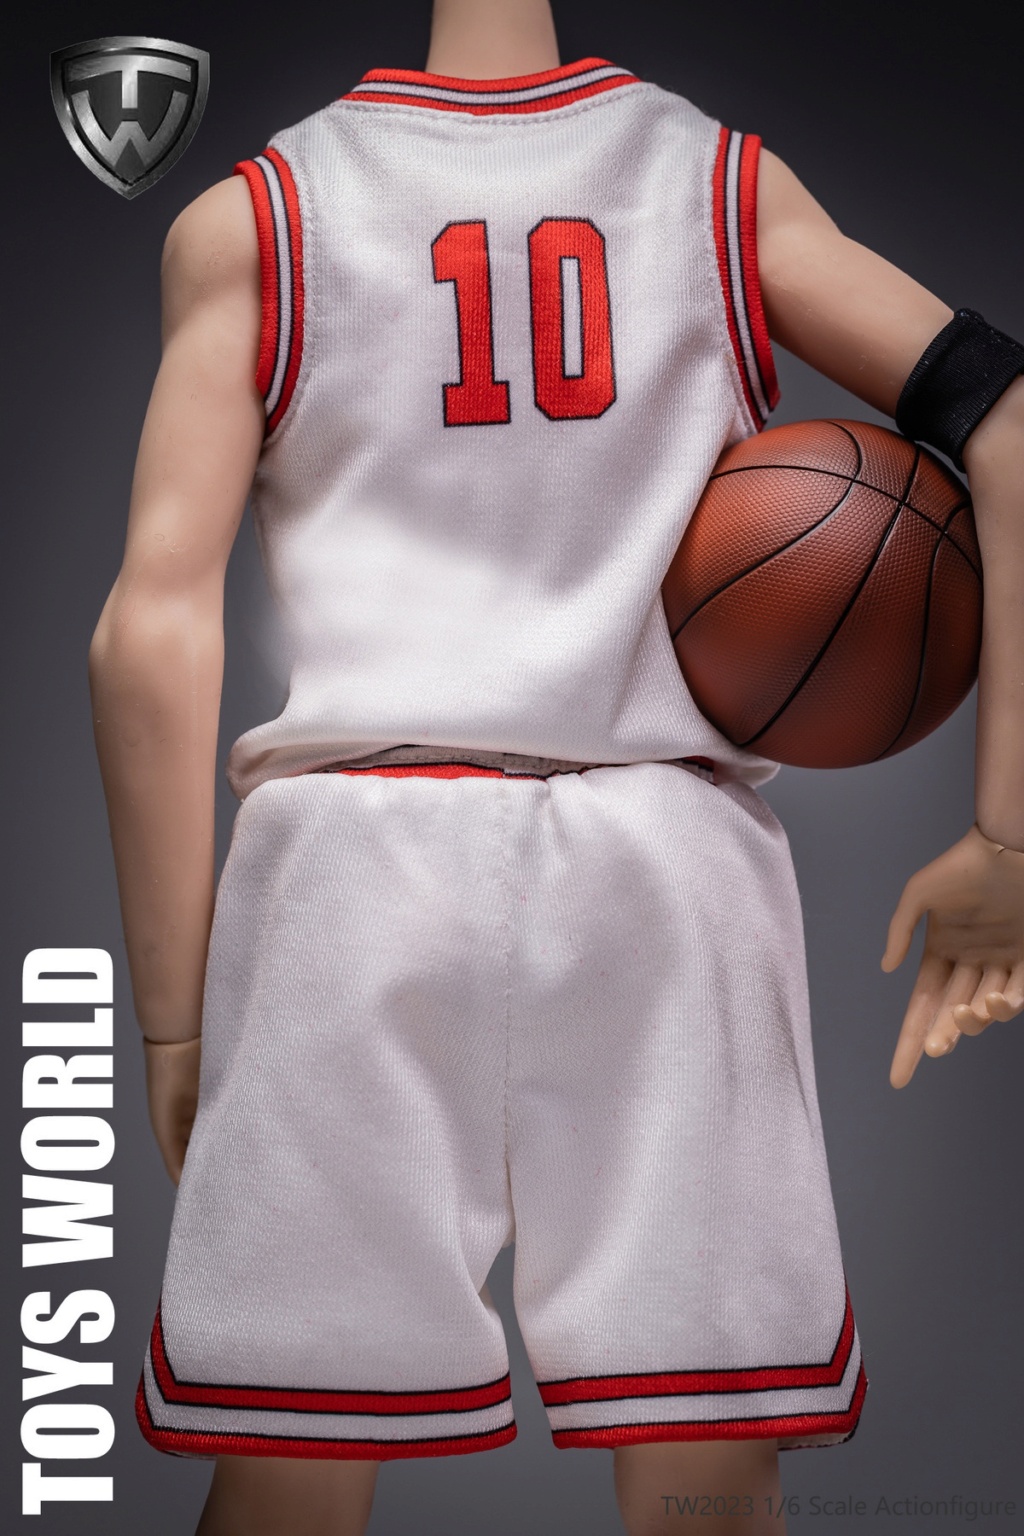 accessory - NEW PRODUCT: TOYS WORLD: 1/6 Slam Dunk Ball Suit #TW2023 11255011